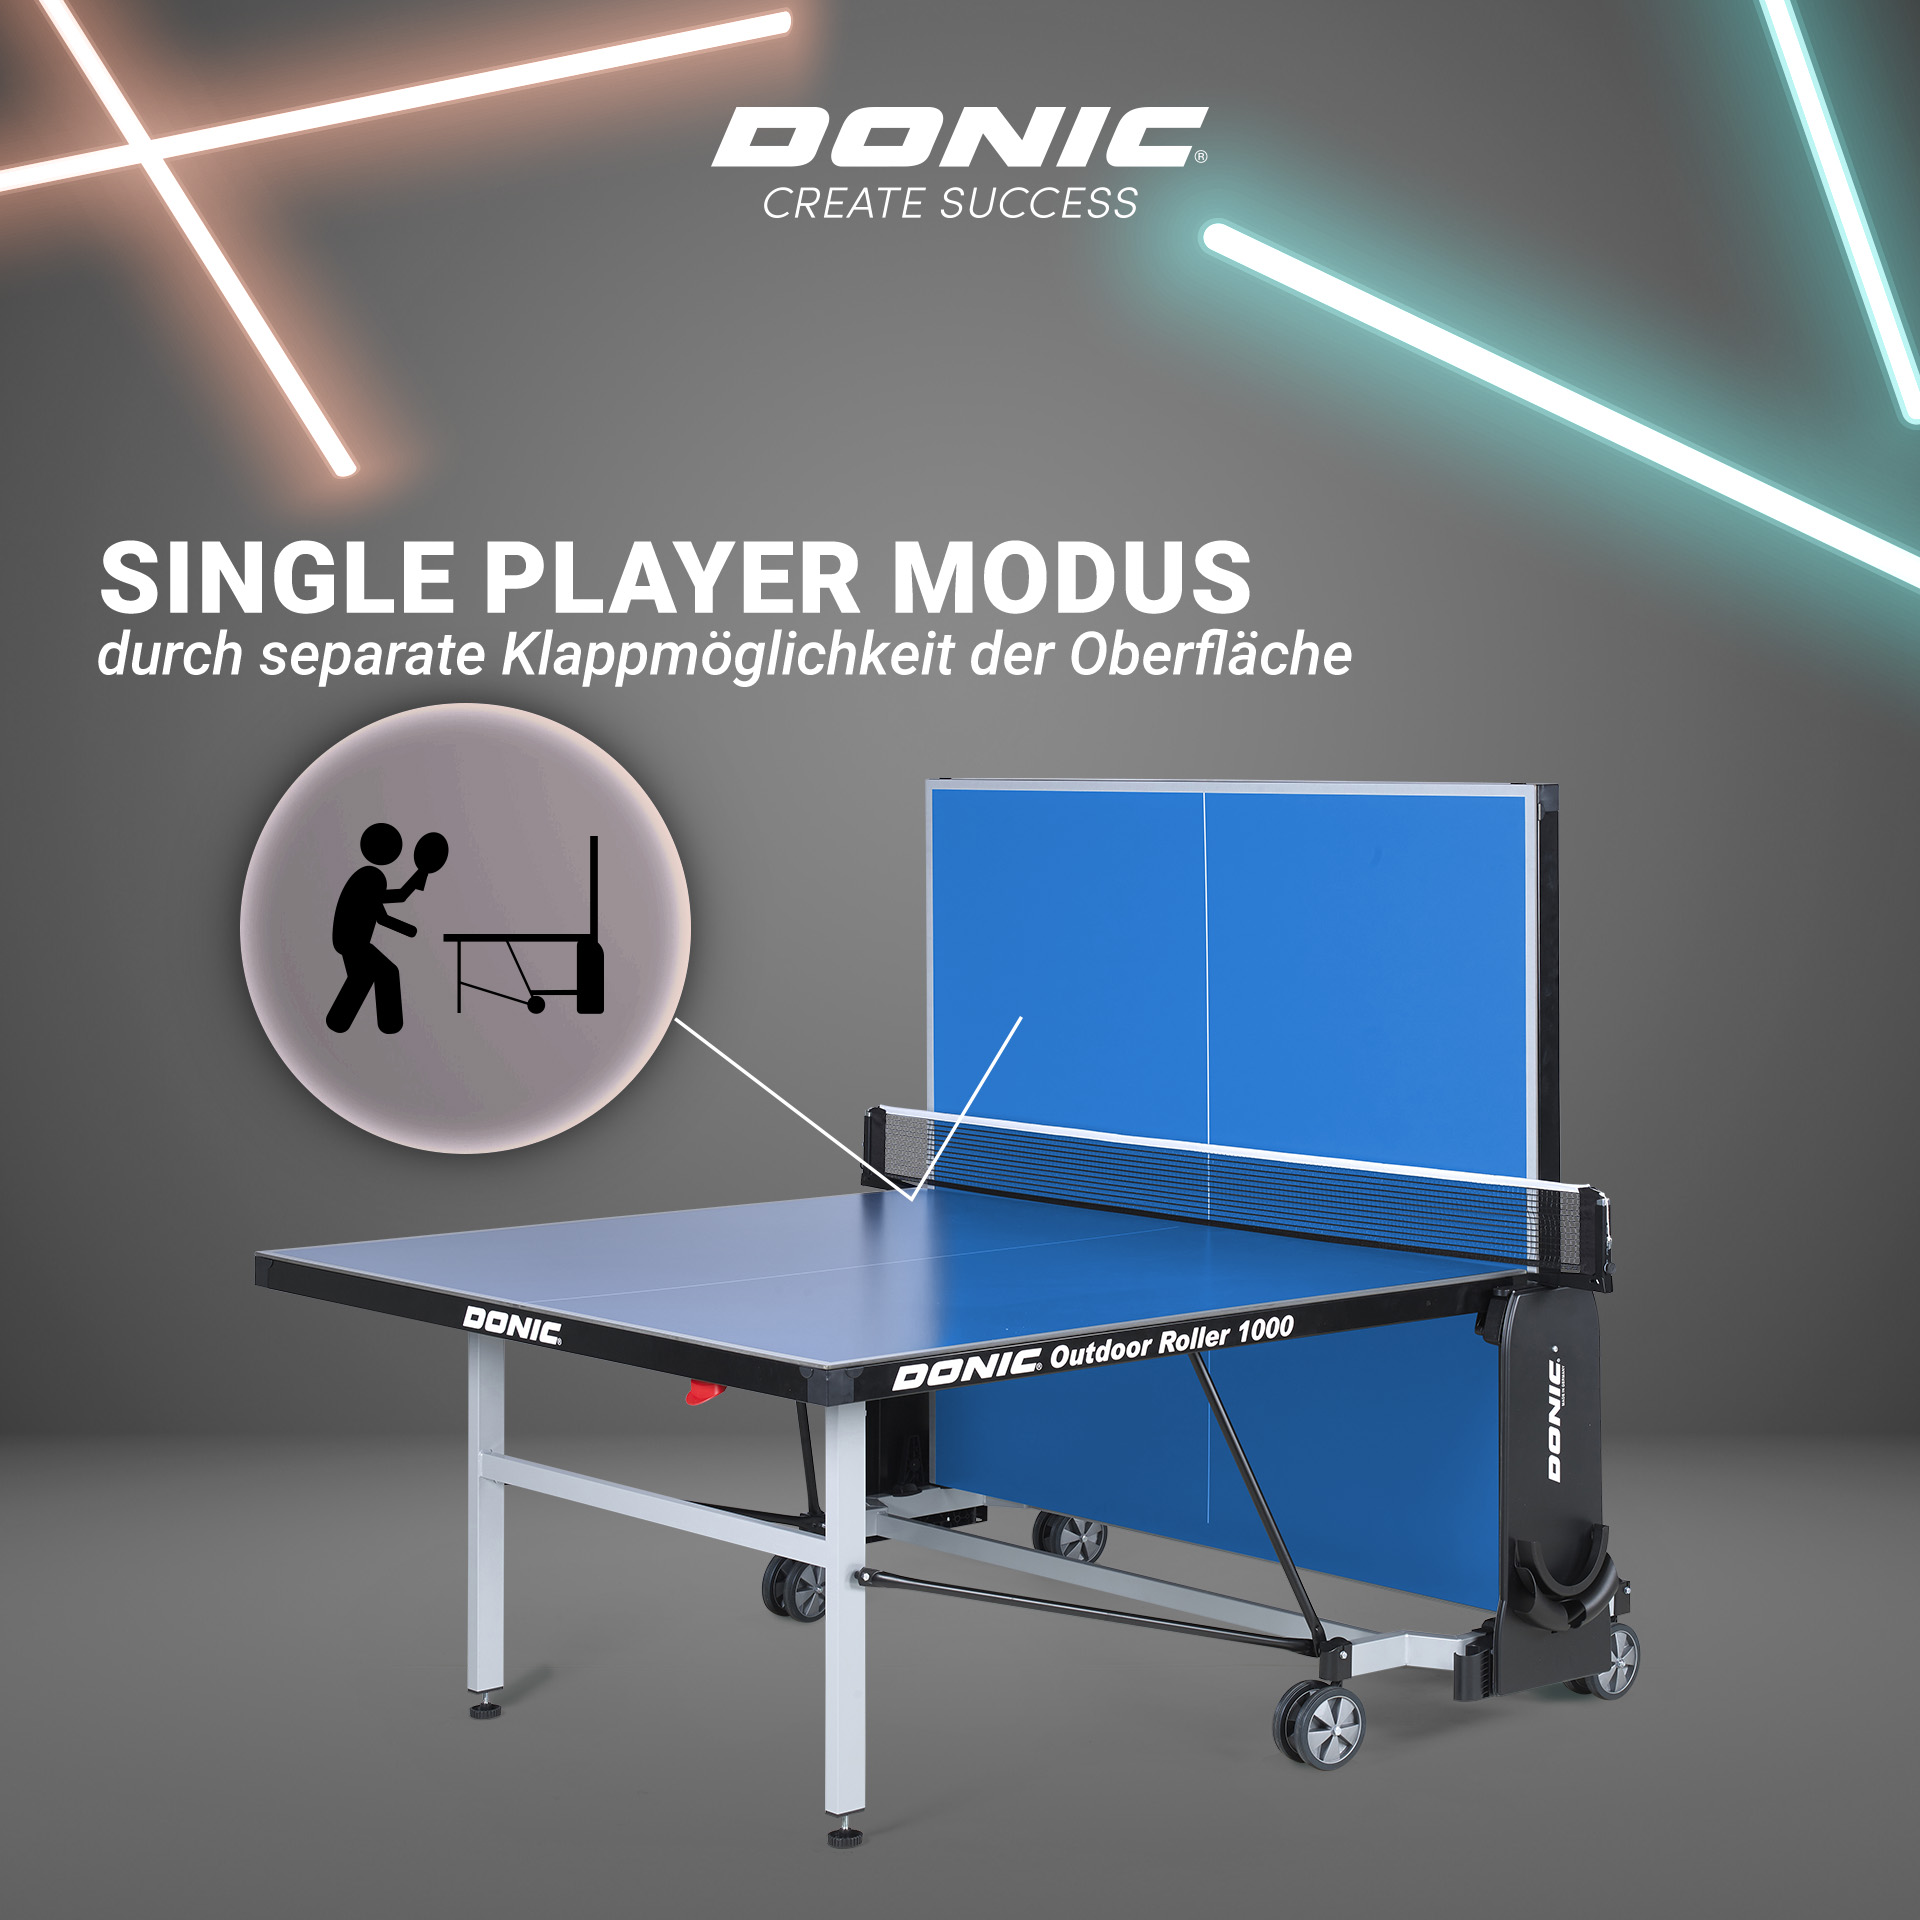 Donic Outdoor Roller 1000 | CREATE SUCCESS